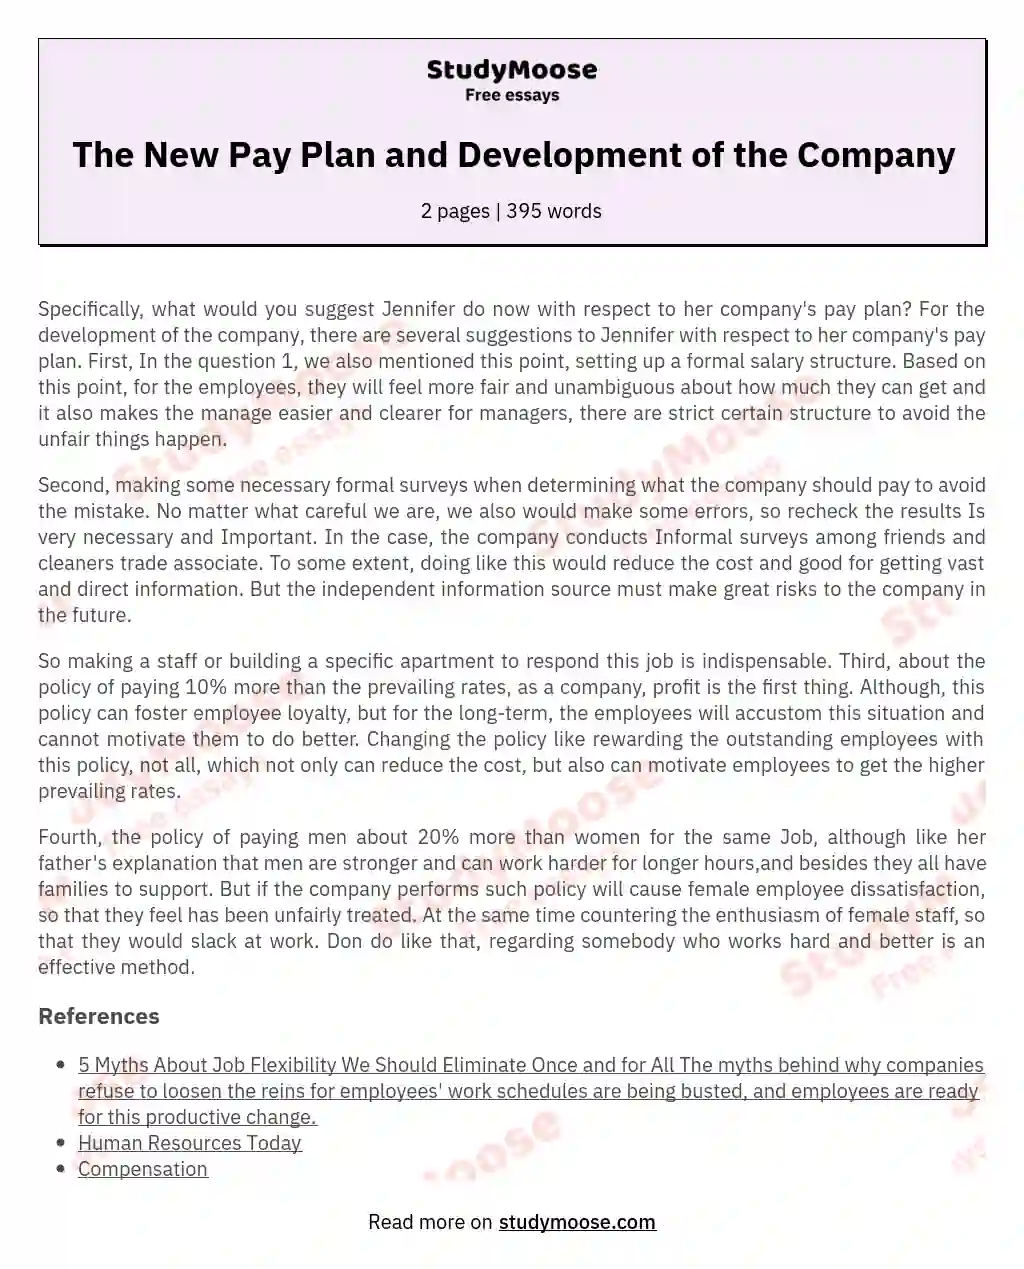 The New Pay Plan and Development of the Company essay